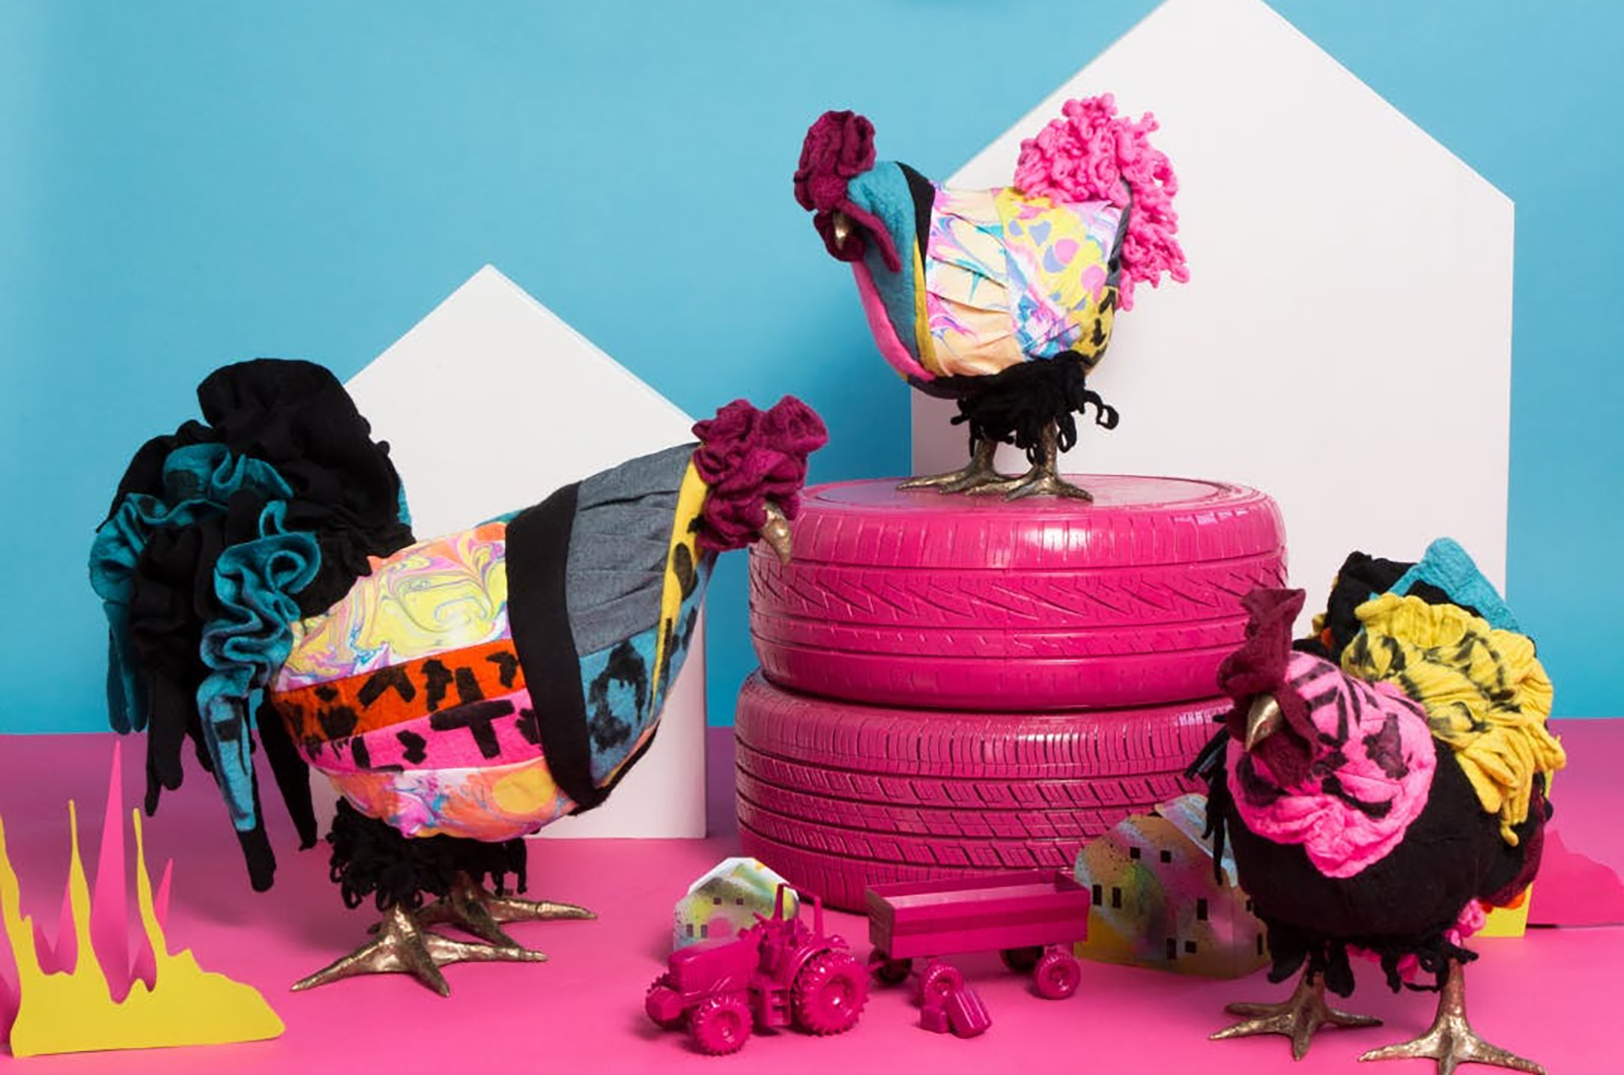 How a pair of chicken footstools hatched into a yarn barnyard of sold-out flock-pleasers